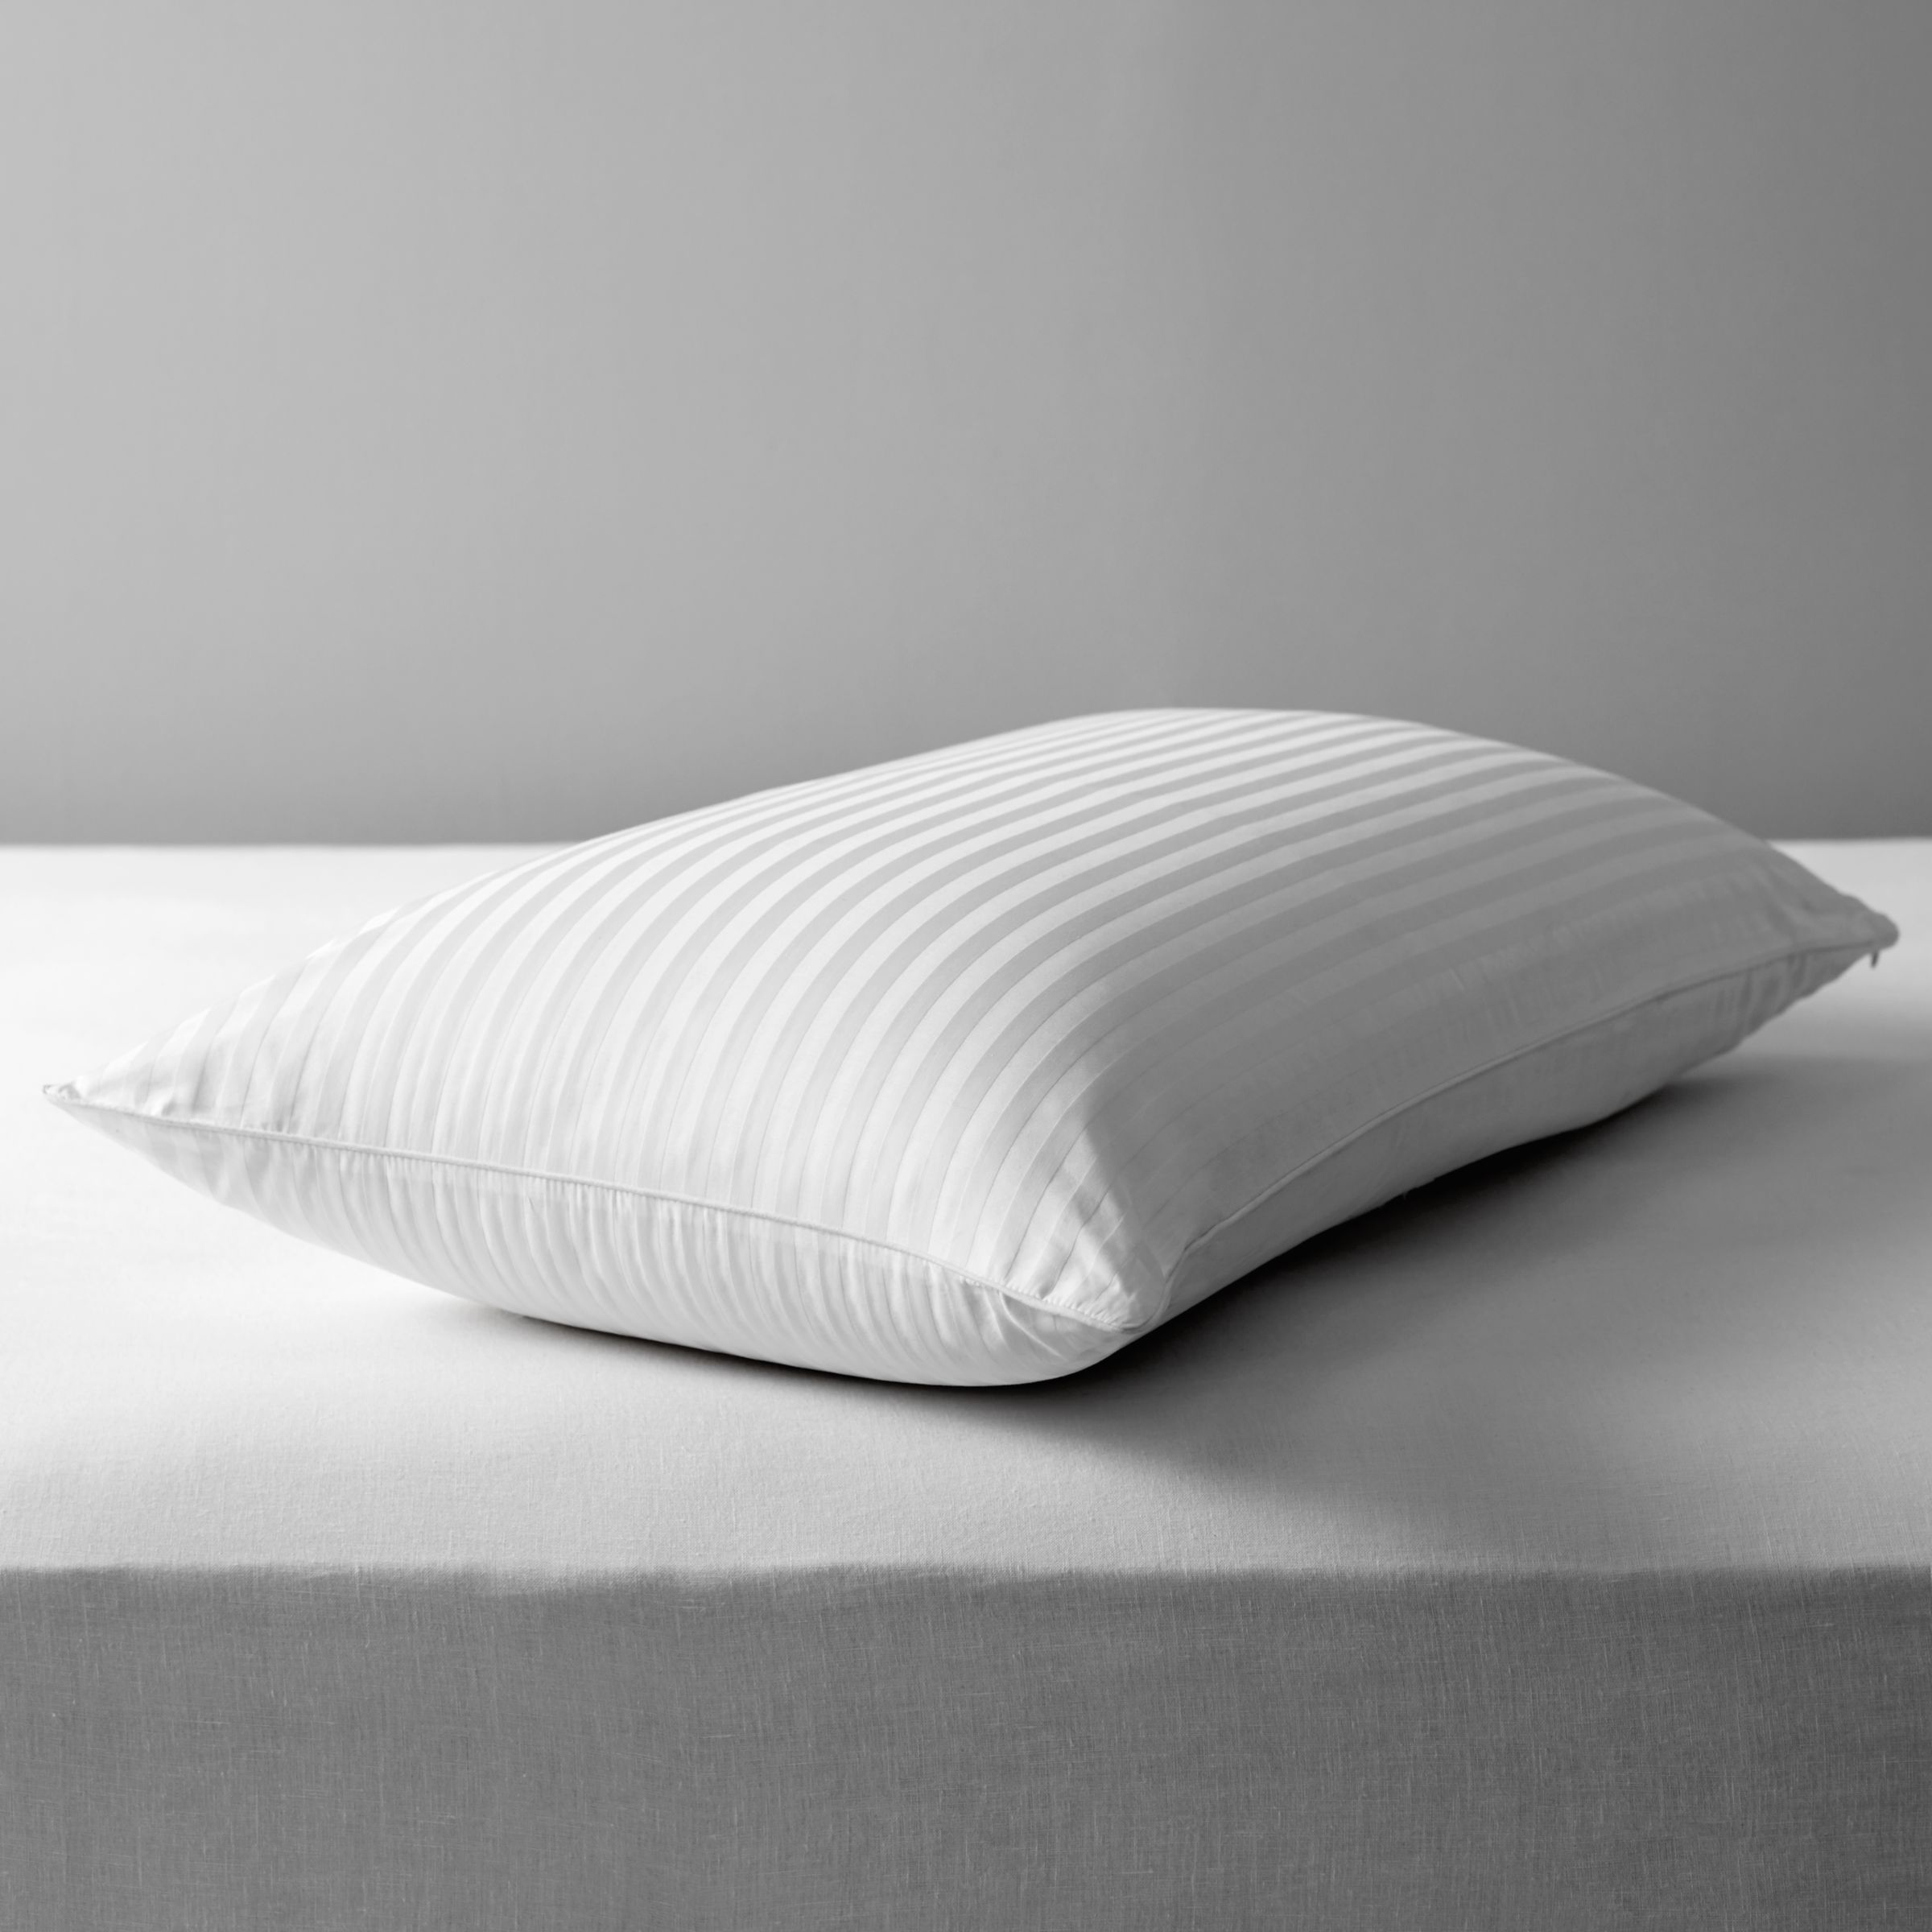 Super Comfort Speciality Pillow 119482